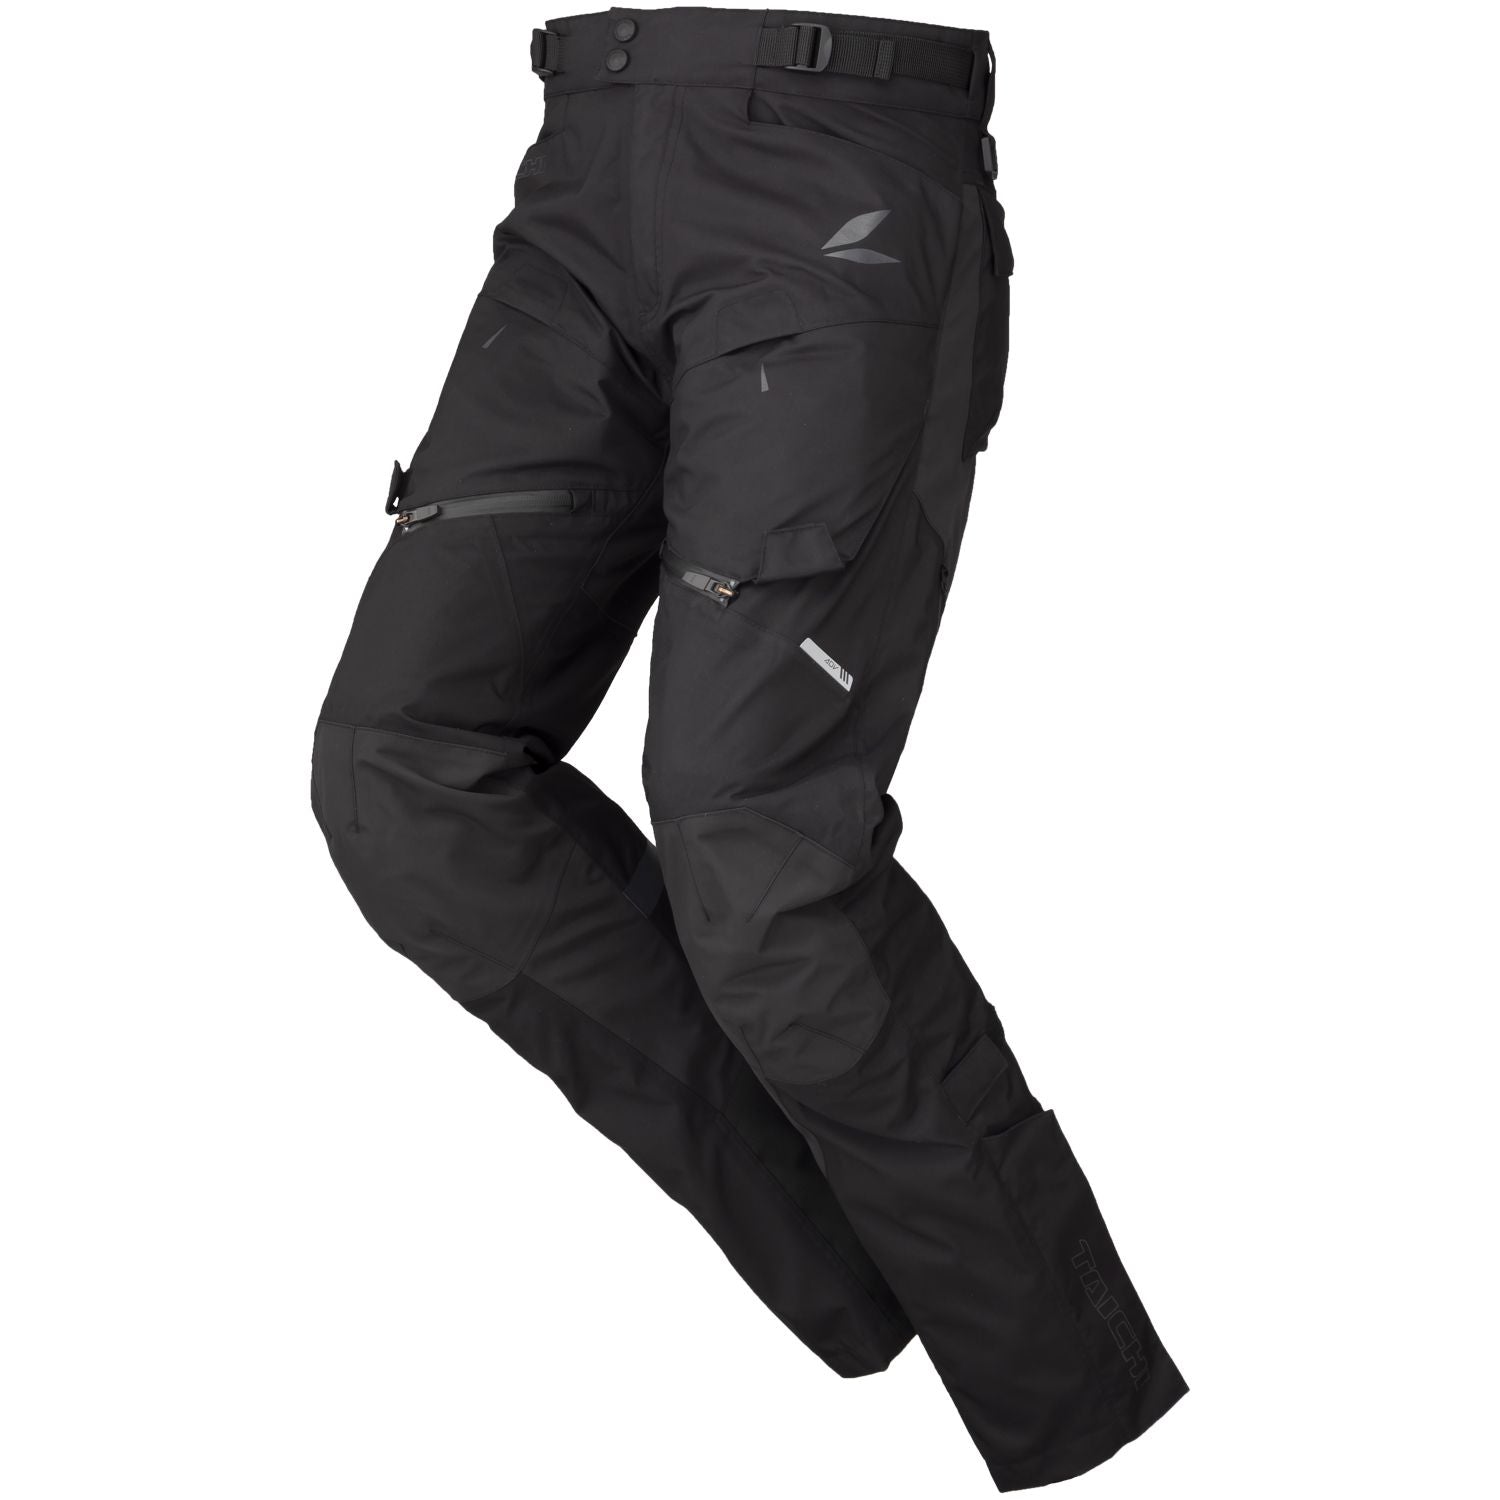 Just Chaps Waterproof Riding Trousers  Saddle Up  Ride